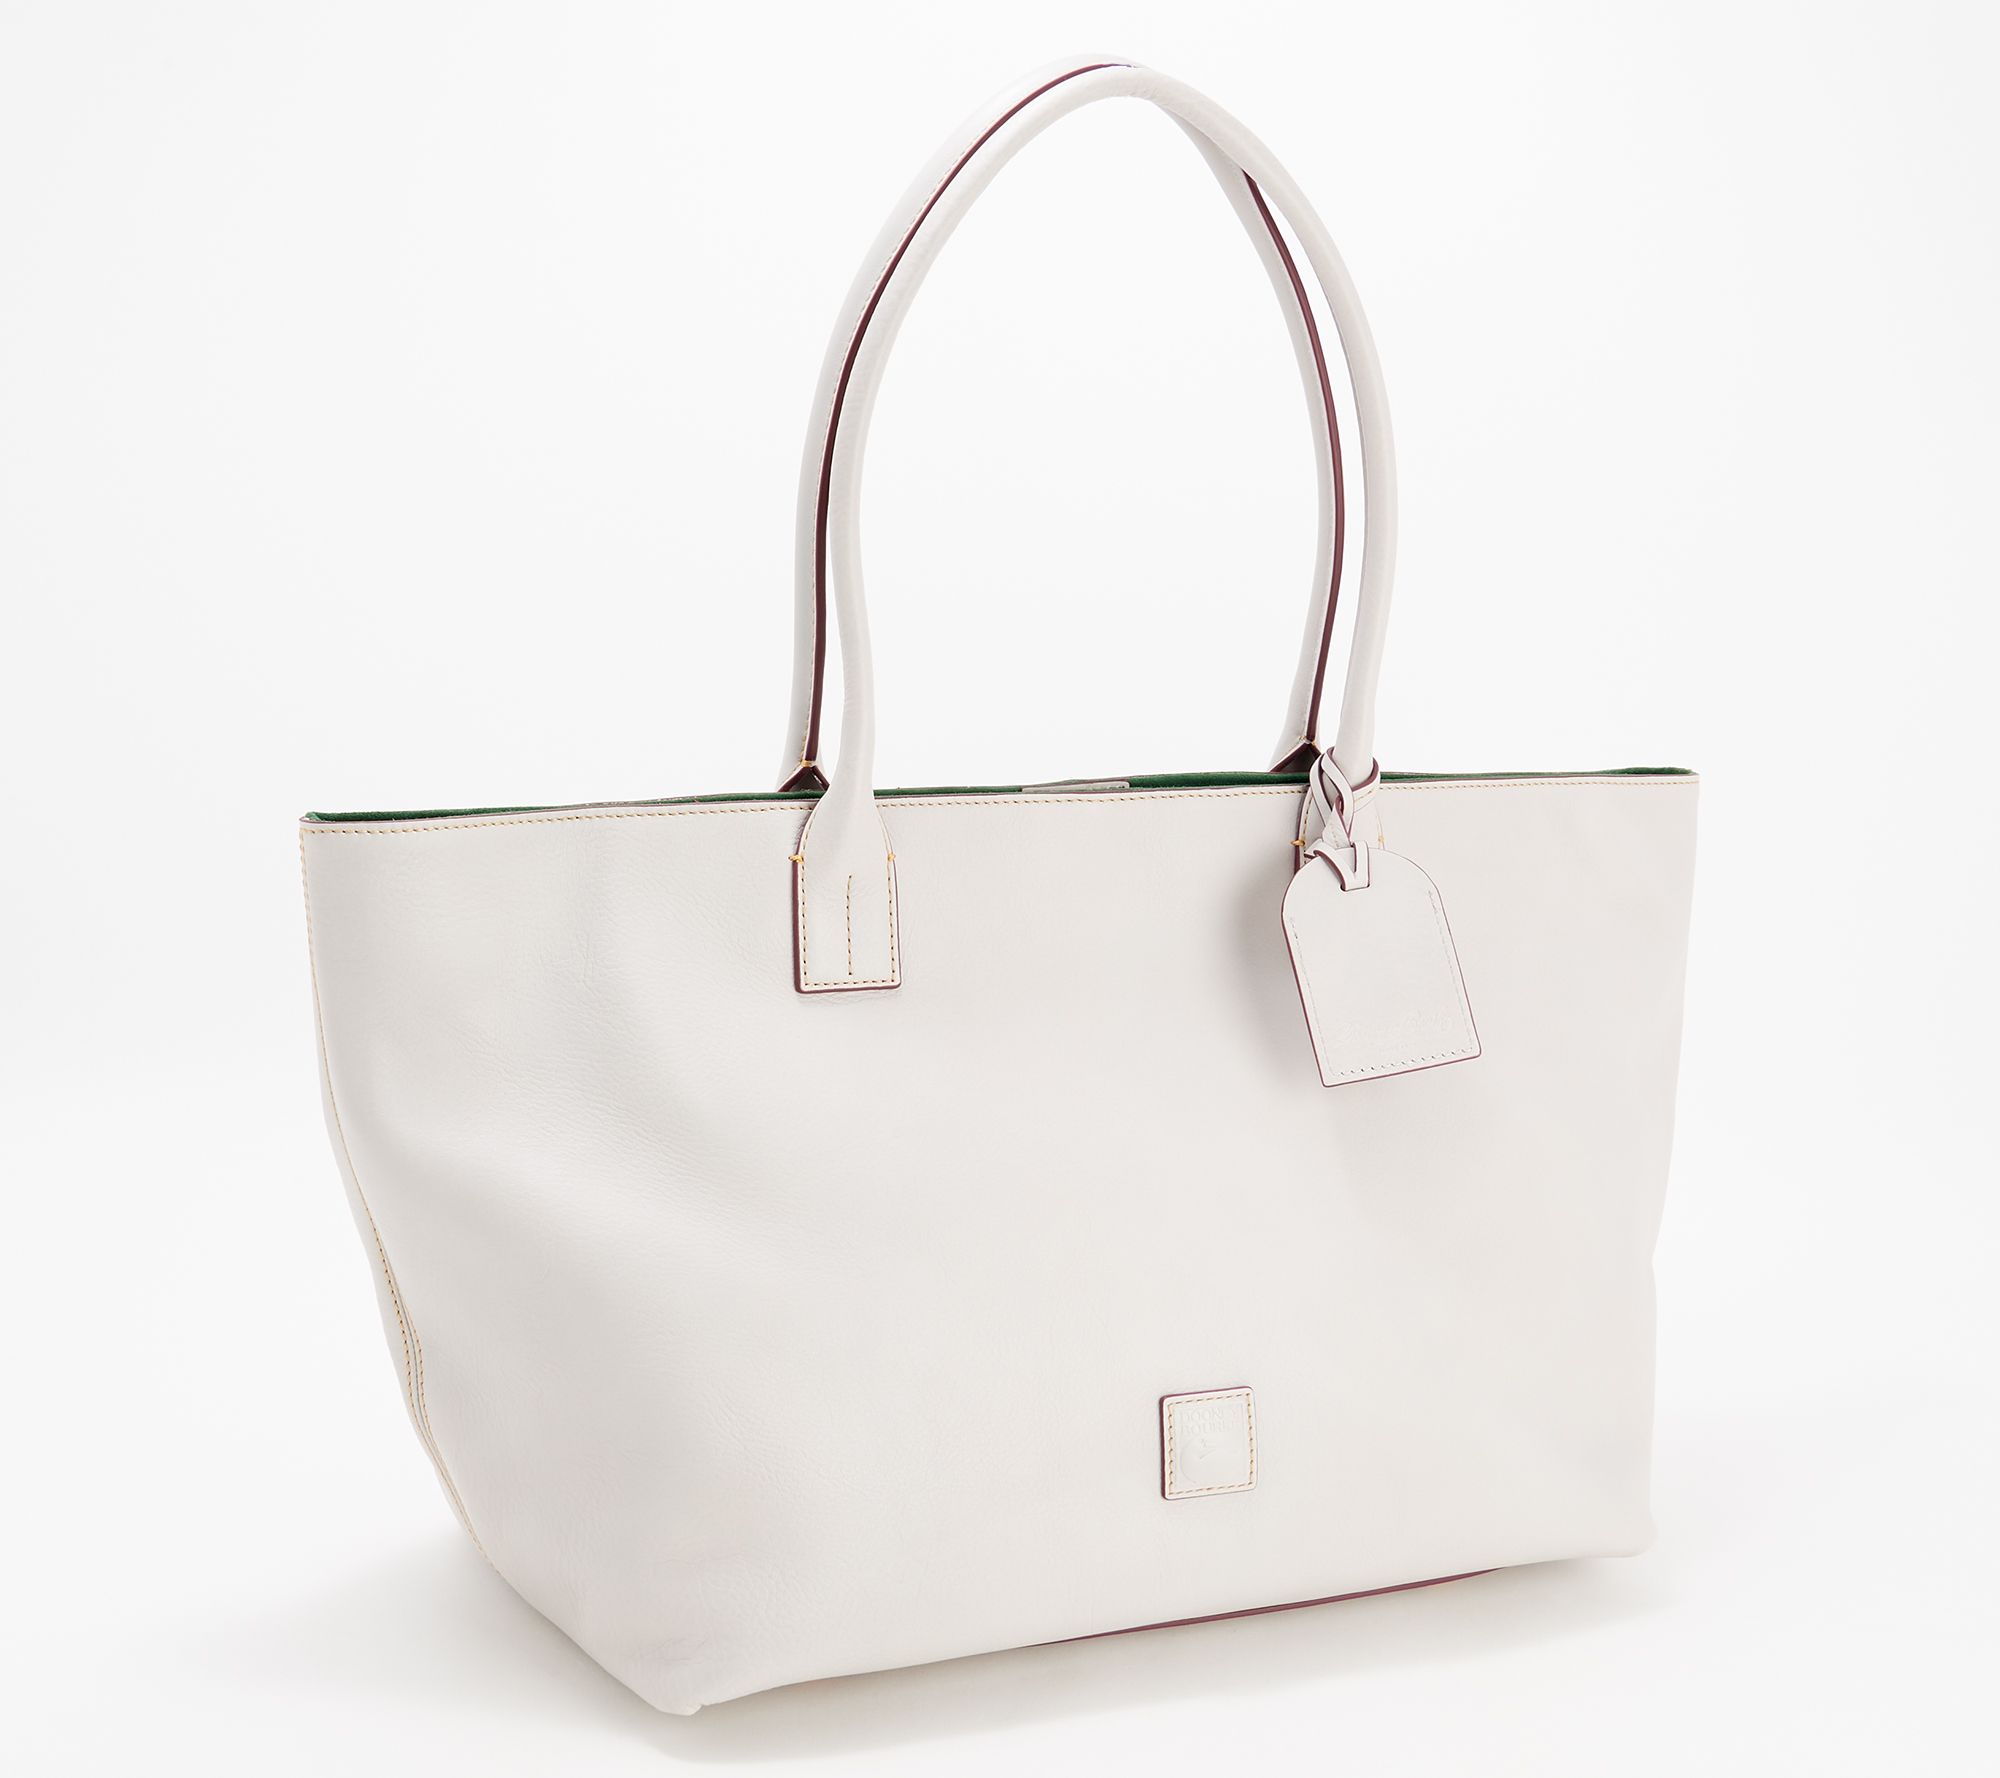 Dooney and Bourke Leather Tote - recoveryparade-japan.com